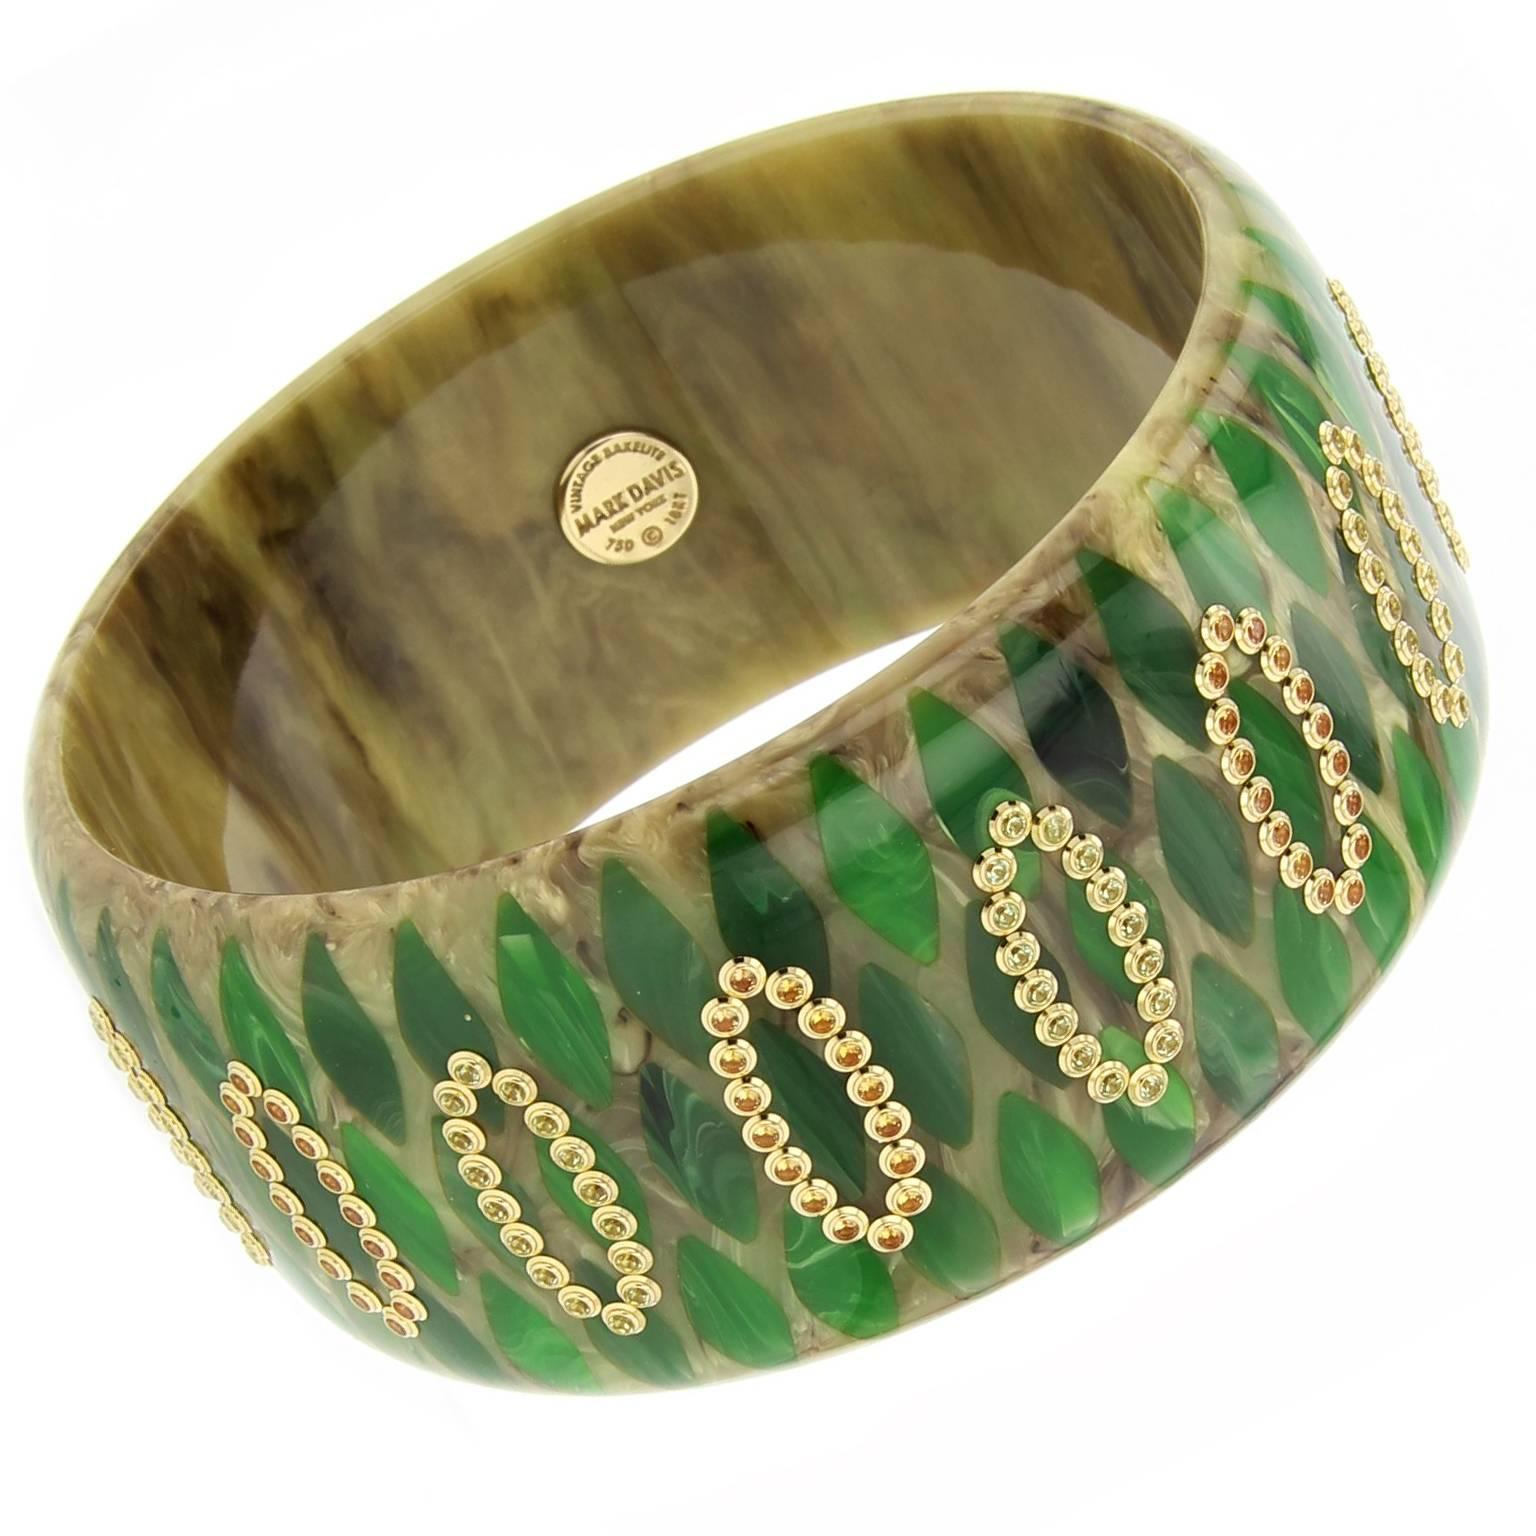 This exceptional Mark Davis Collector bangle was created from marbled beige and green vintage bakelite. The bangle is precisely inlaid with an elliptical pattern of forest green bakelite pieces. Fine yellow sapphire and peridot, bezel-set in 18k